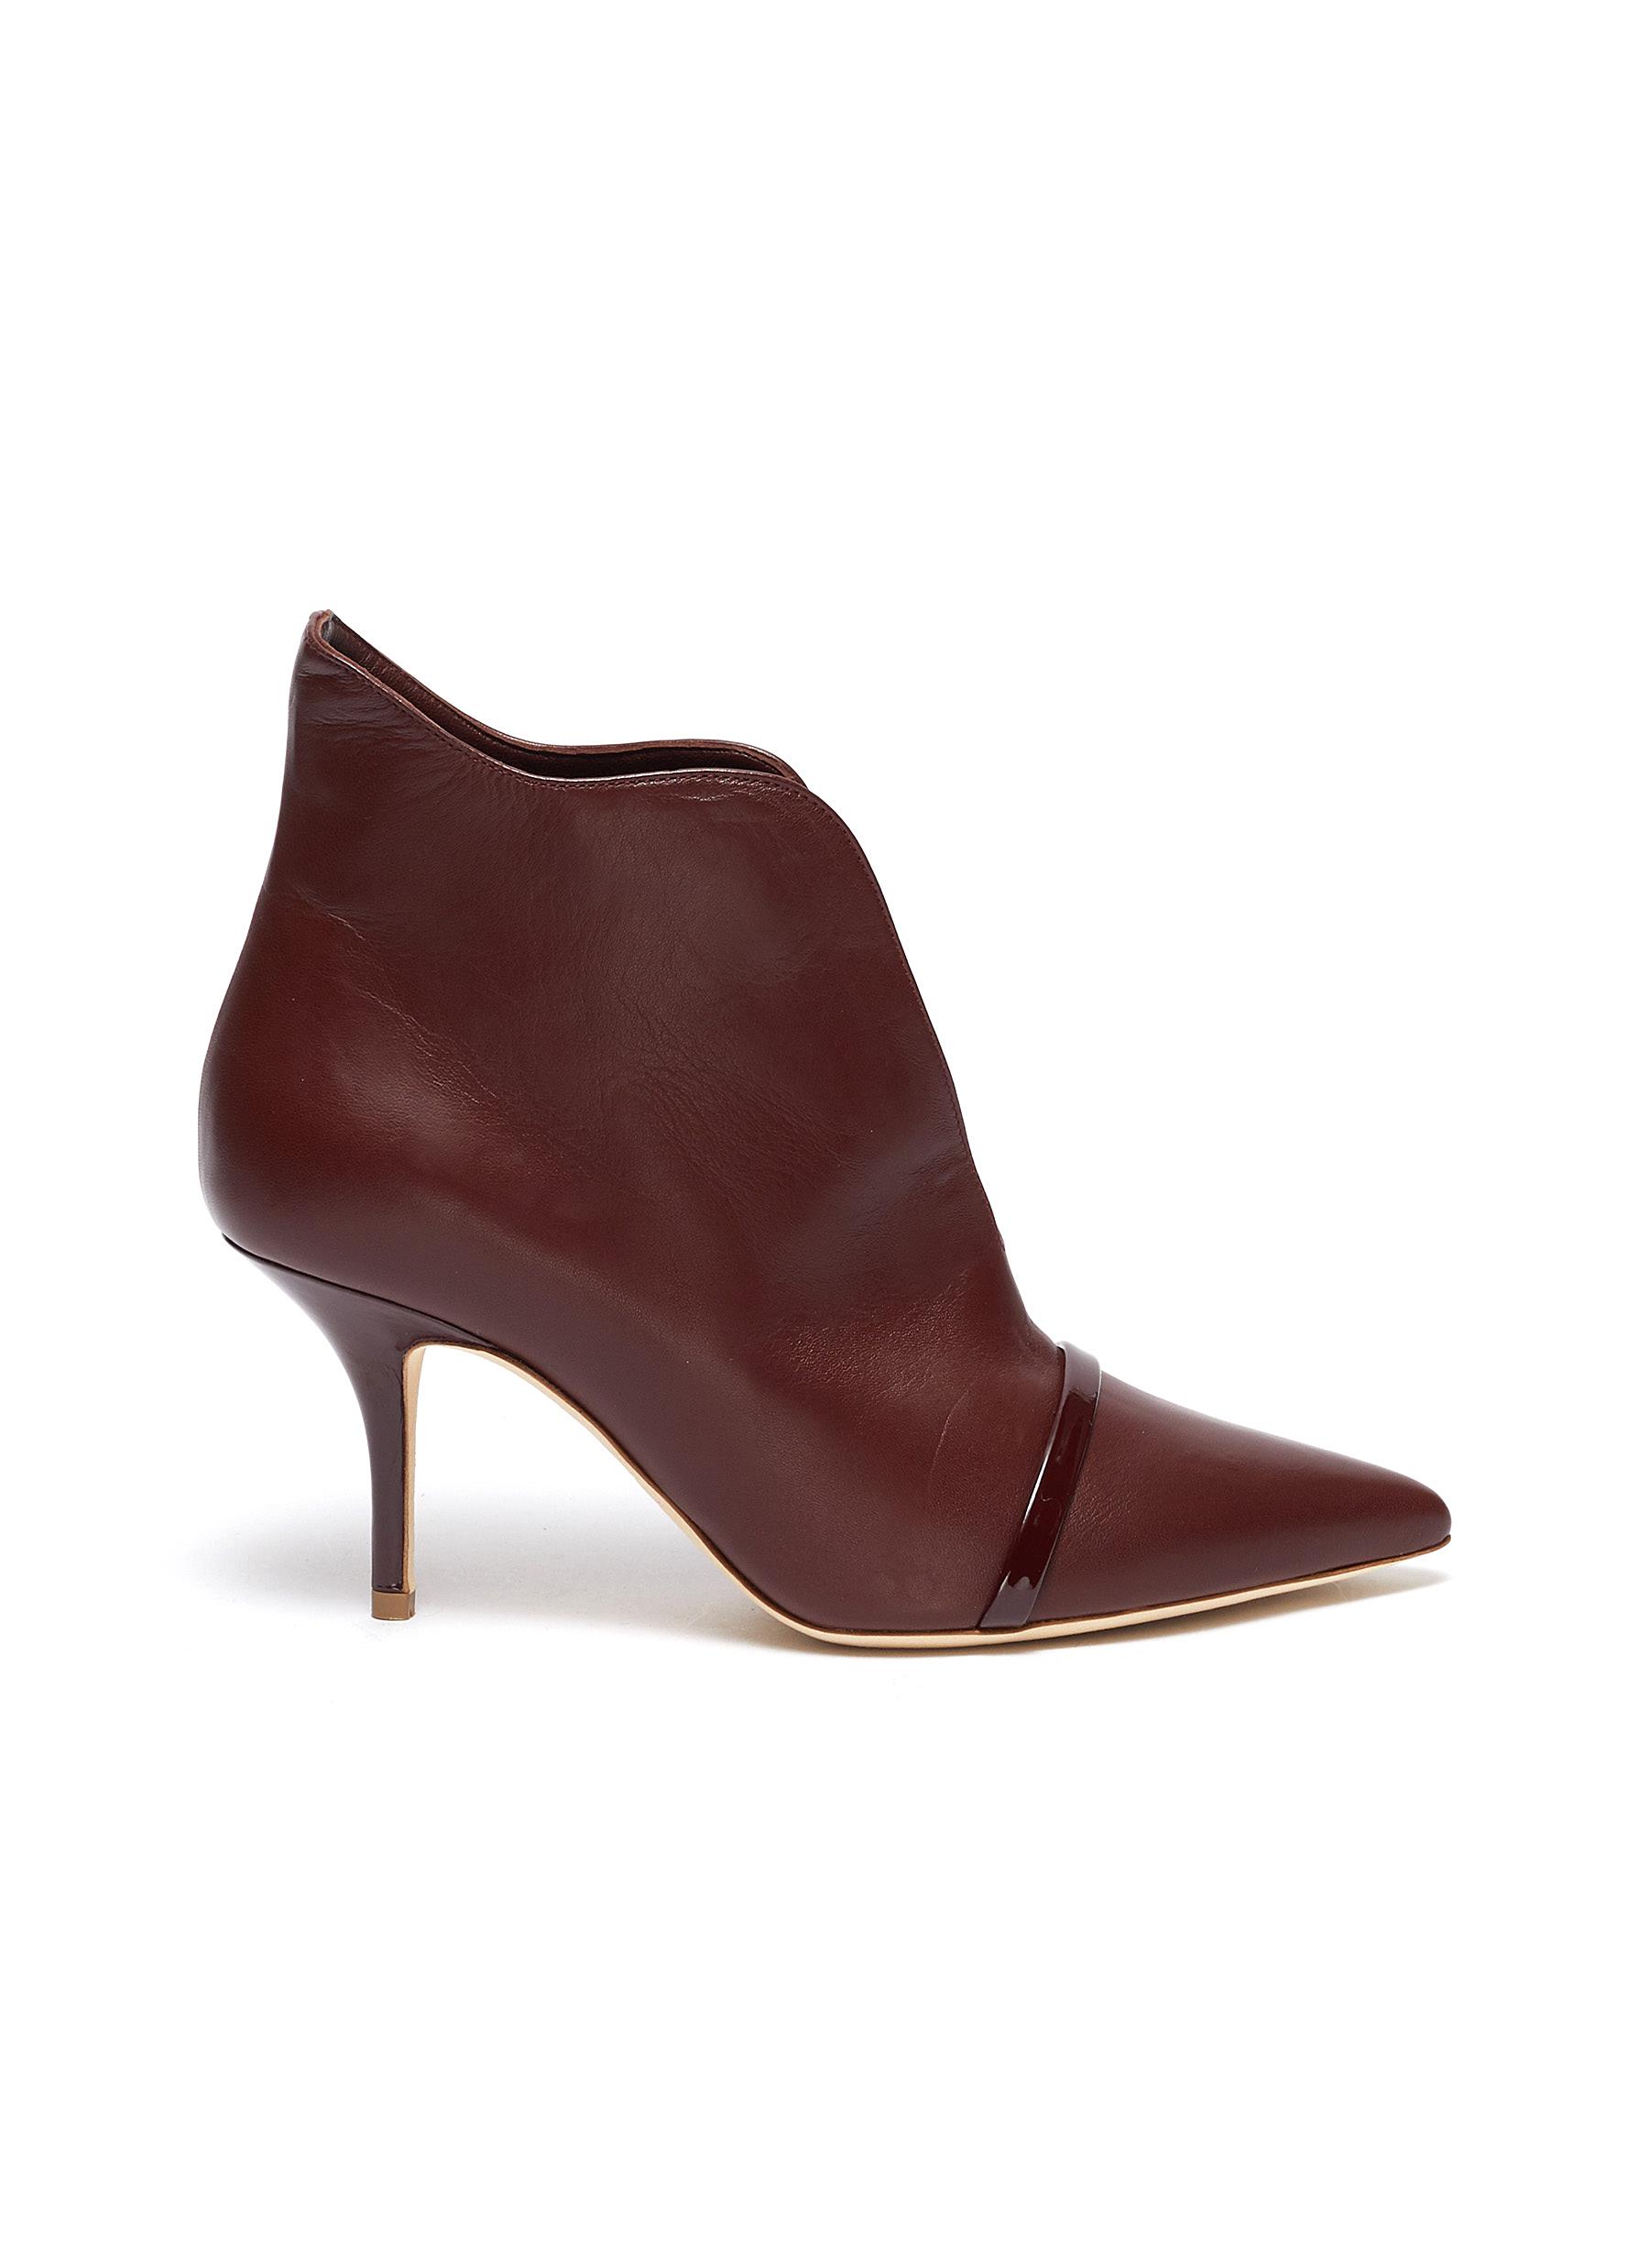 Cora leather ankle boots by Malone Souliers